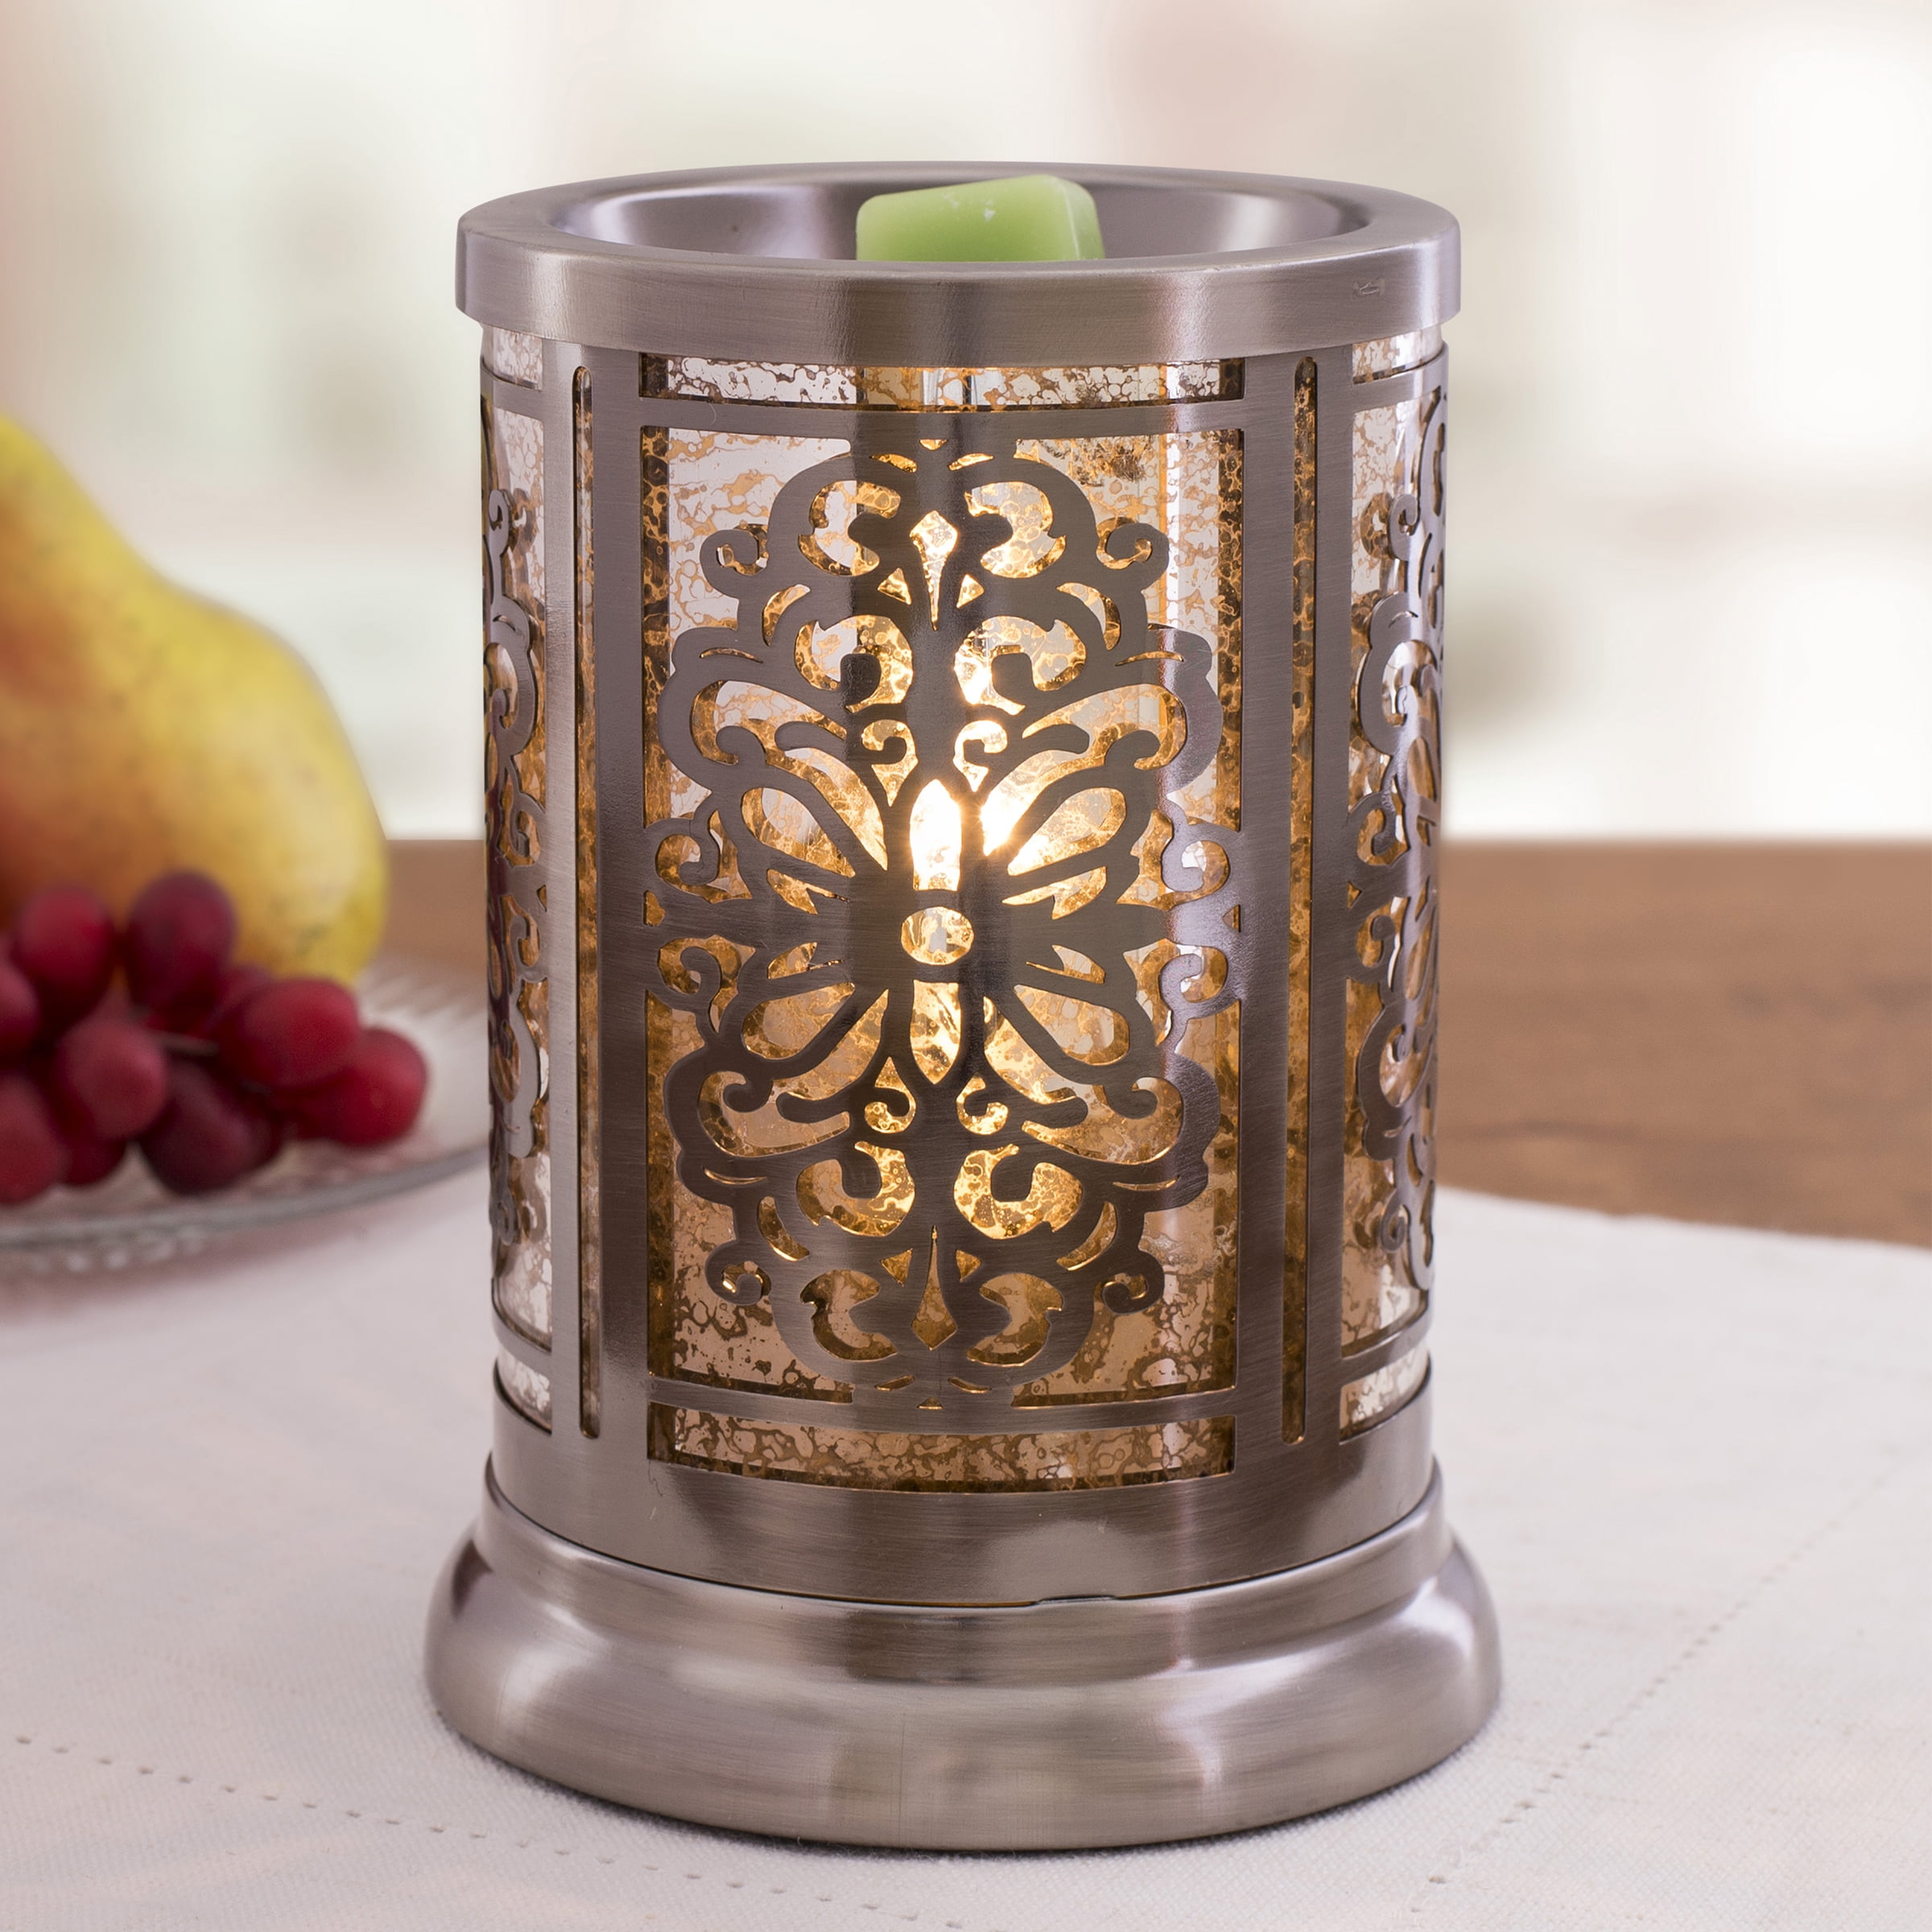 13 Best Wax Warmers in 2023 - Top-Rated Candle Wax Warmers